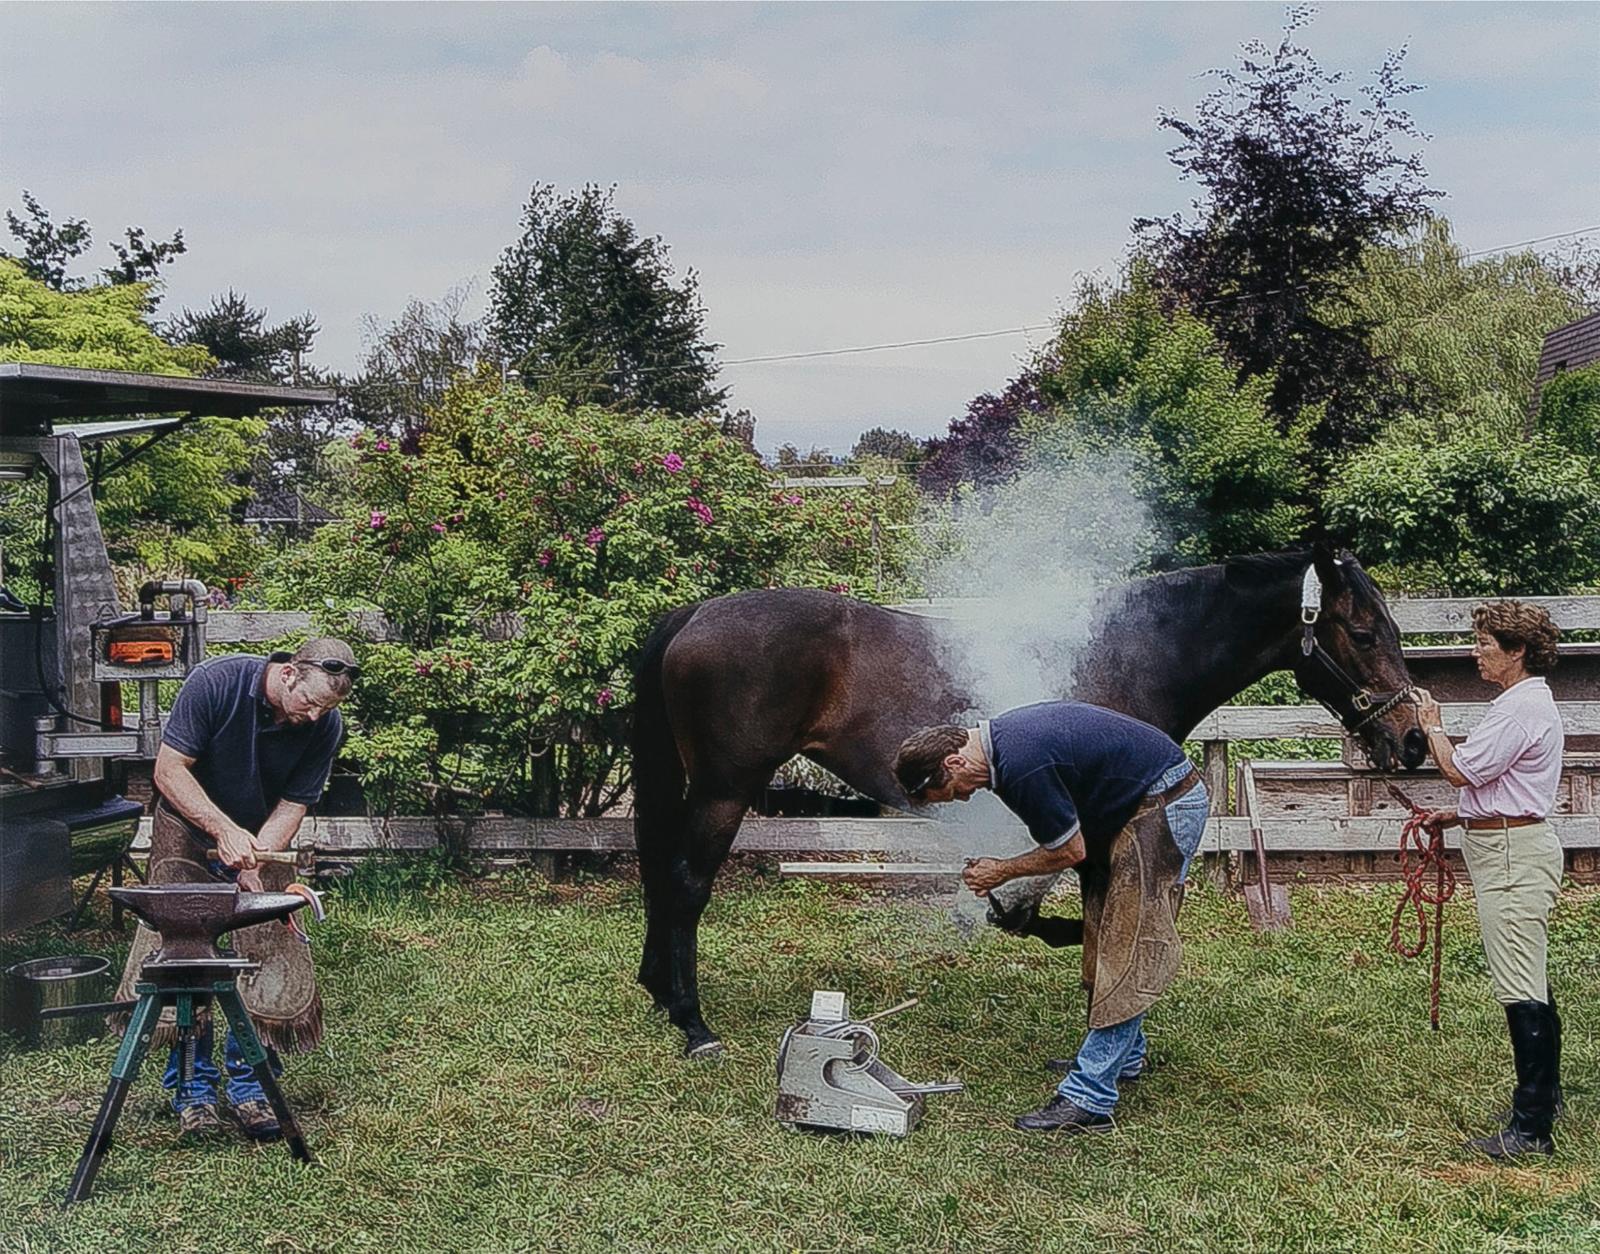 Scott Mcfarland (1975) - Reshoeing, Farrier James Findel With Assistant In Southlands, 2003